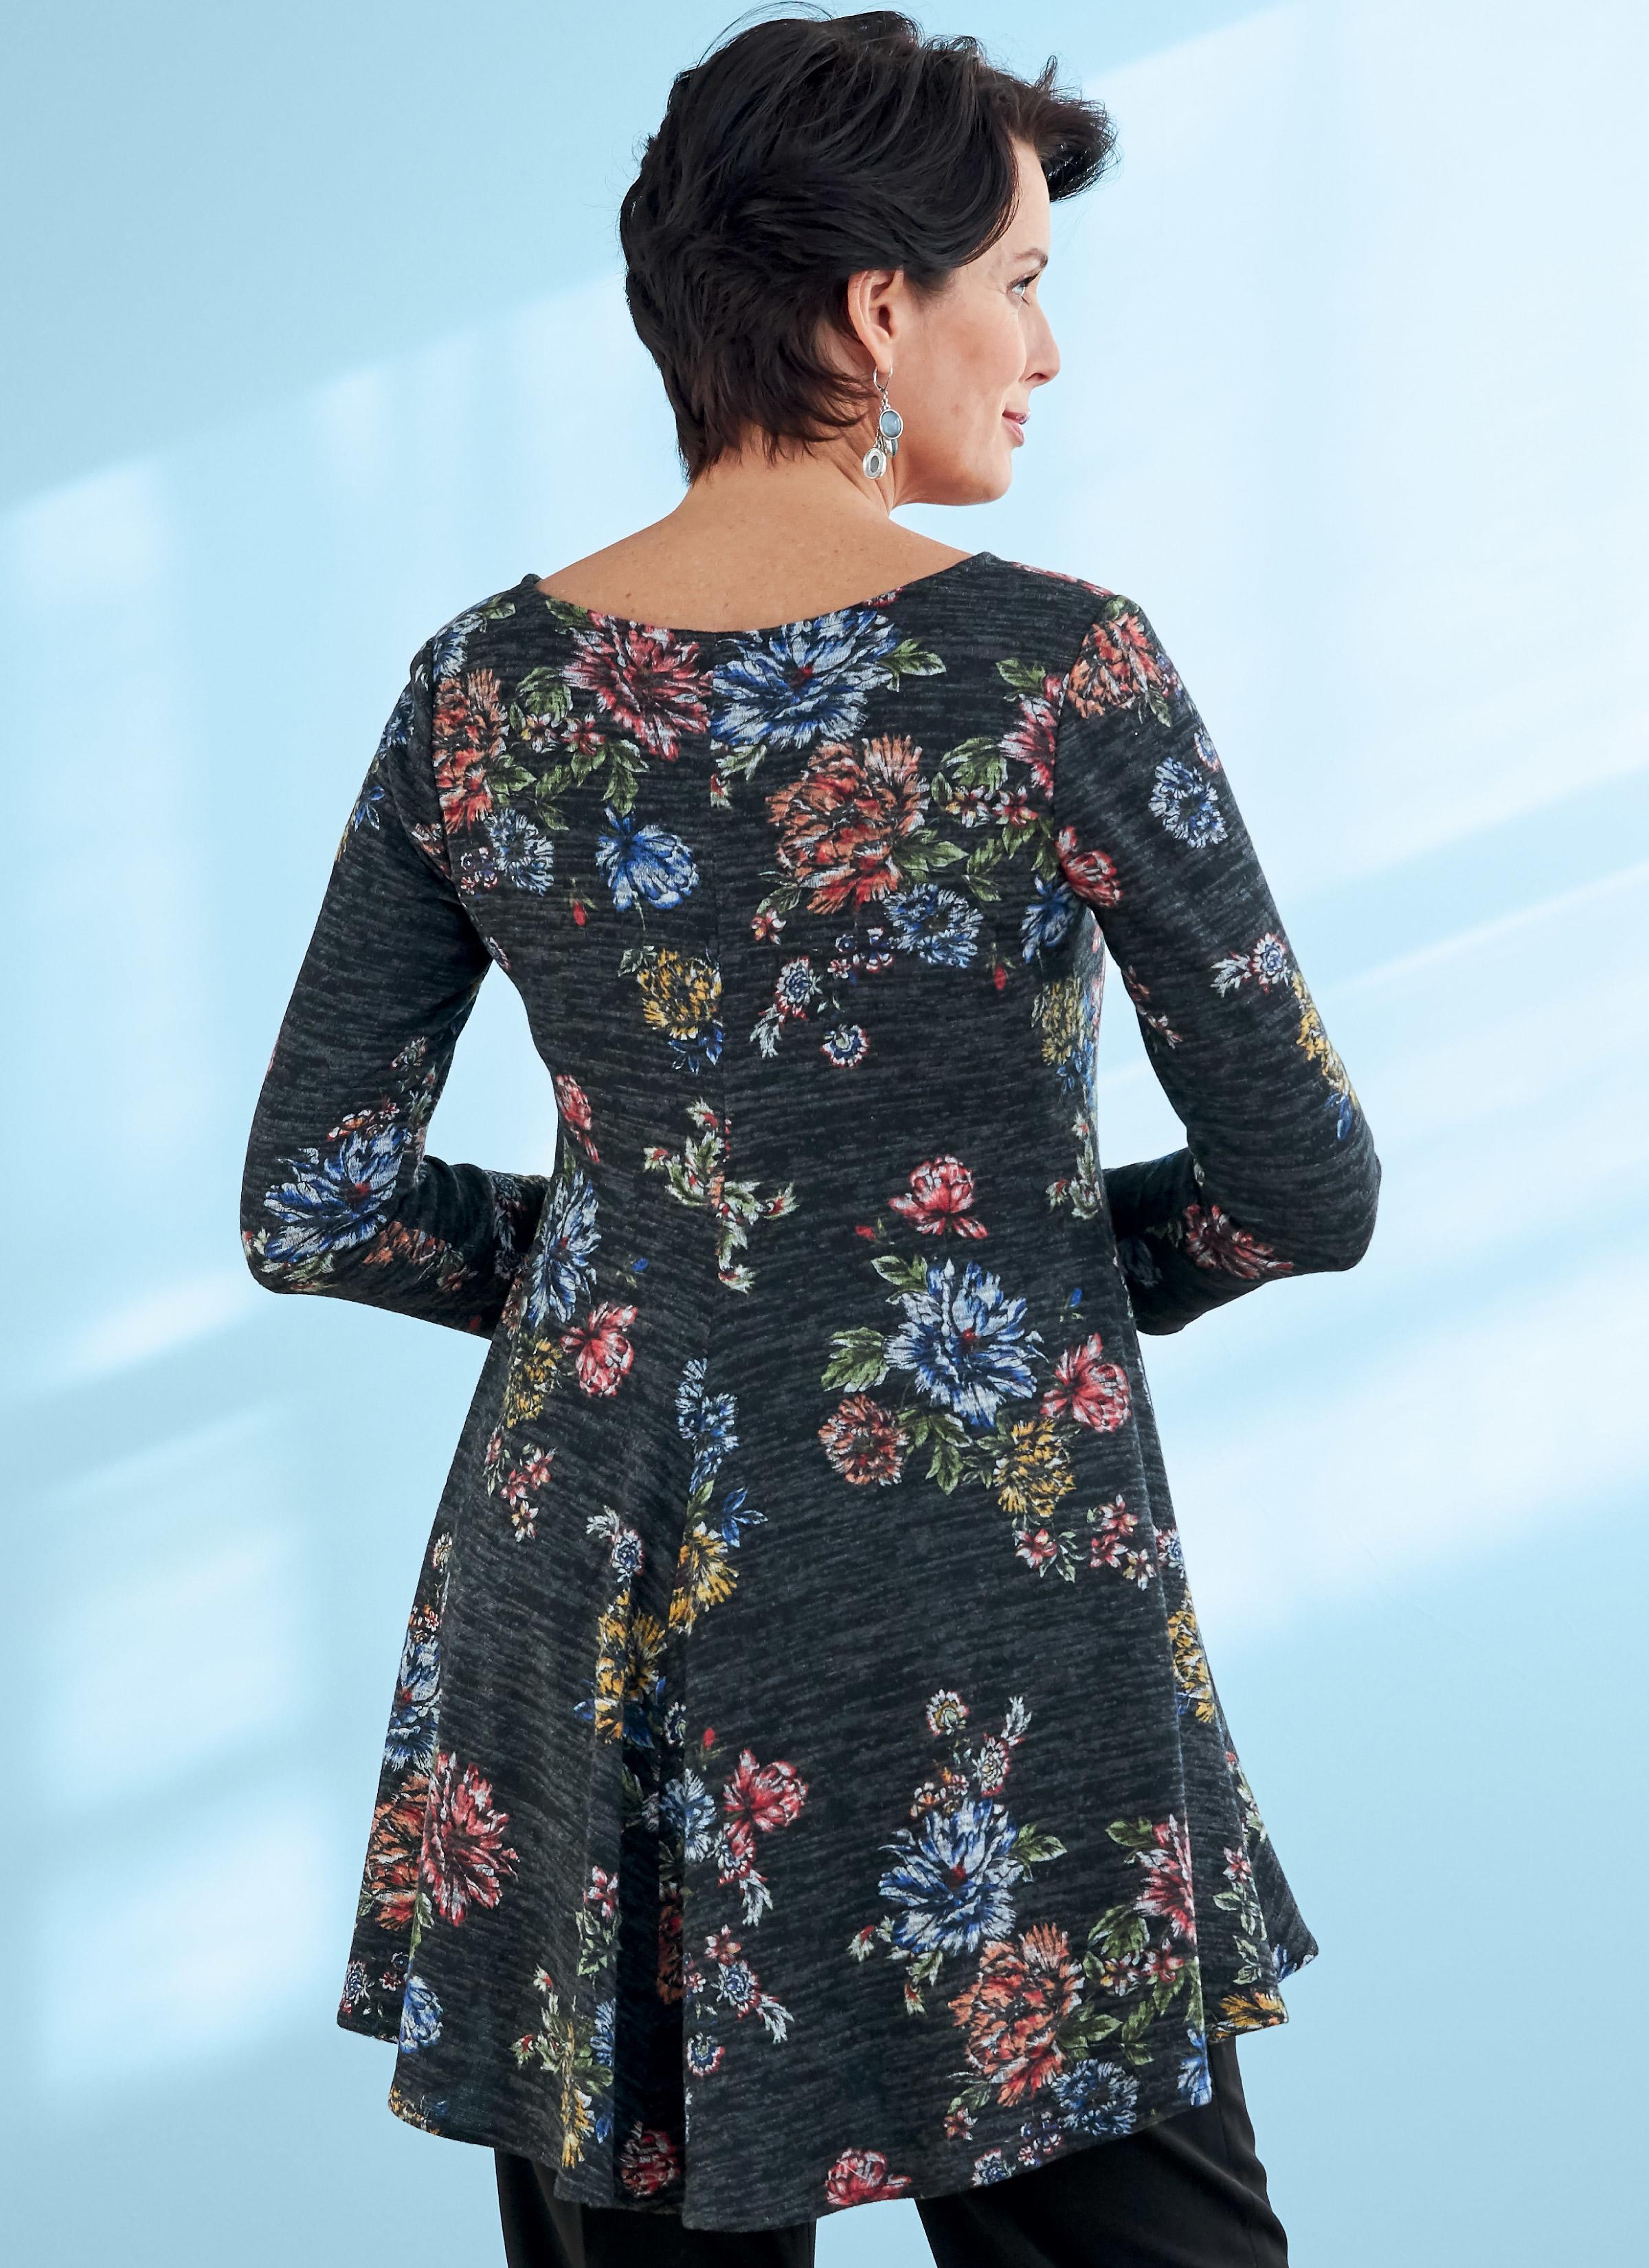 Butterick B6752 Misses' Fit and Flare Knit Tunics